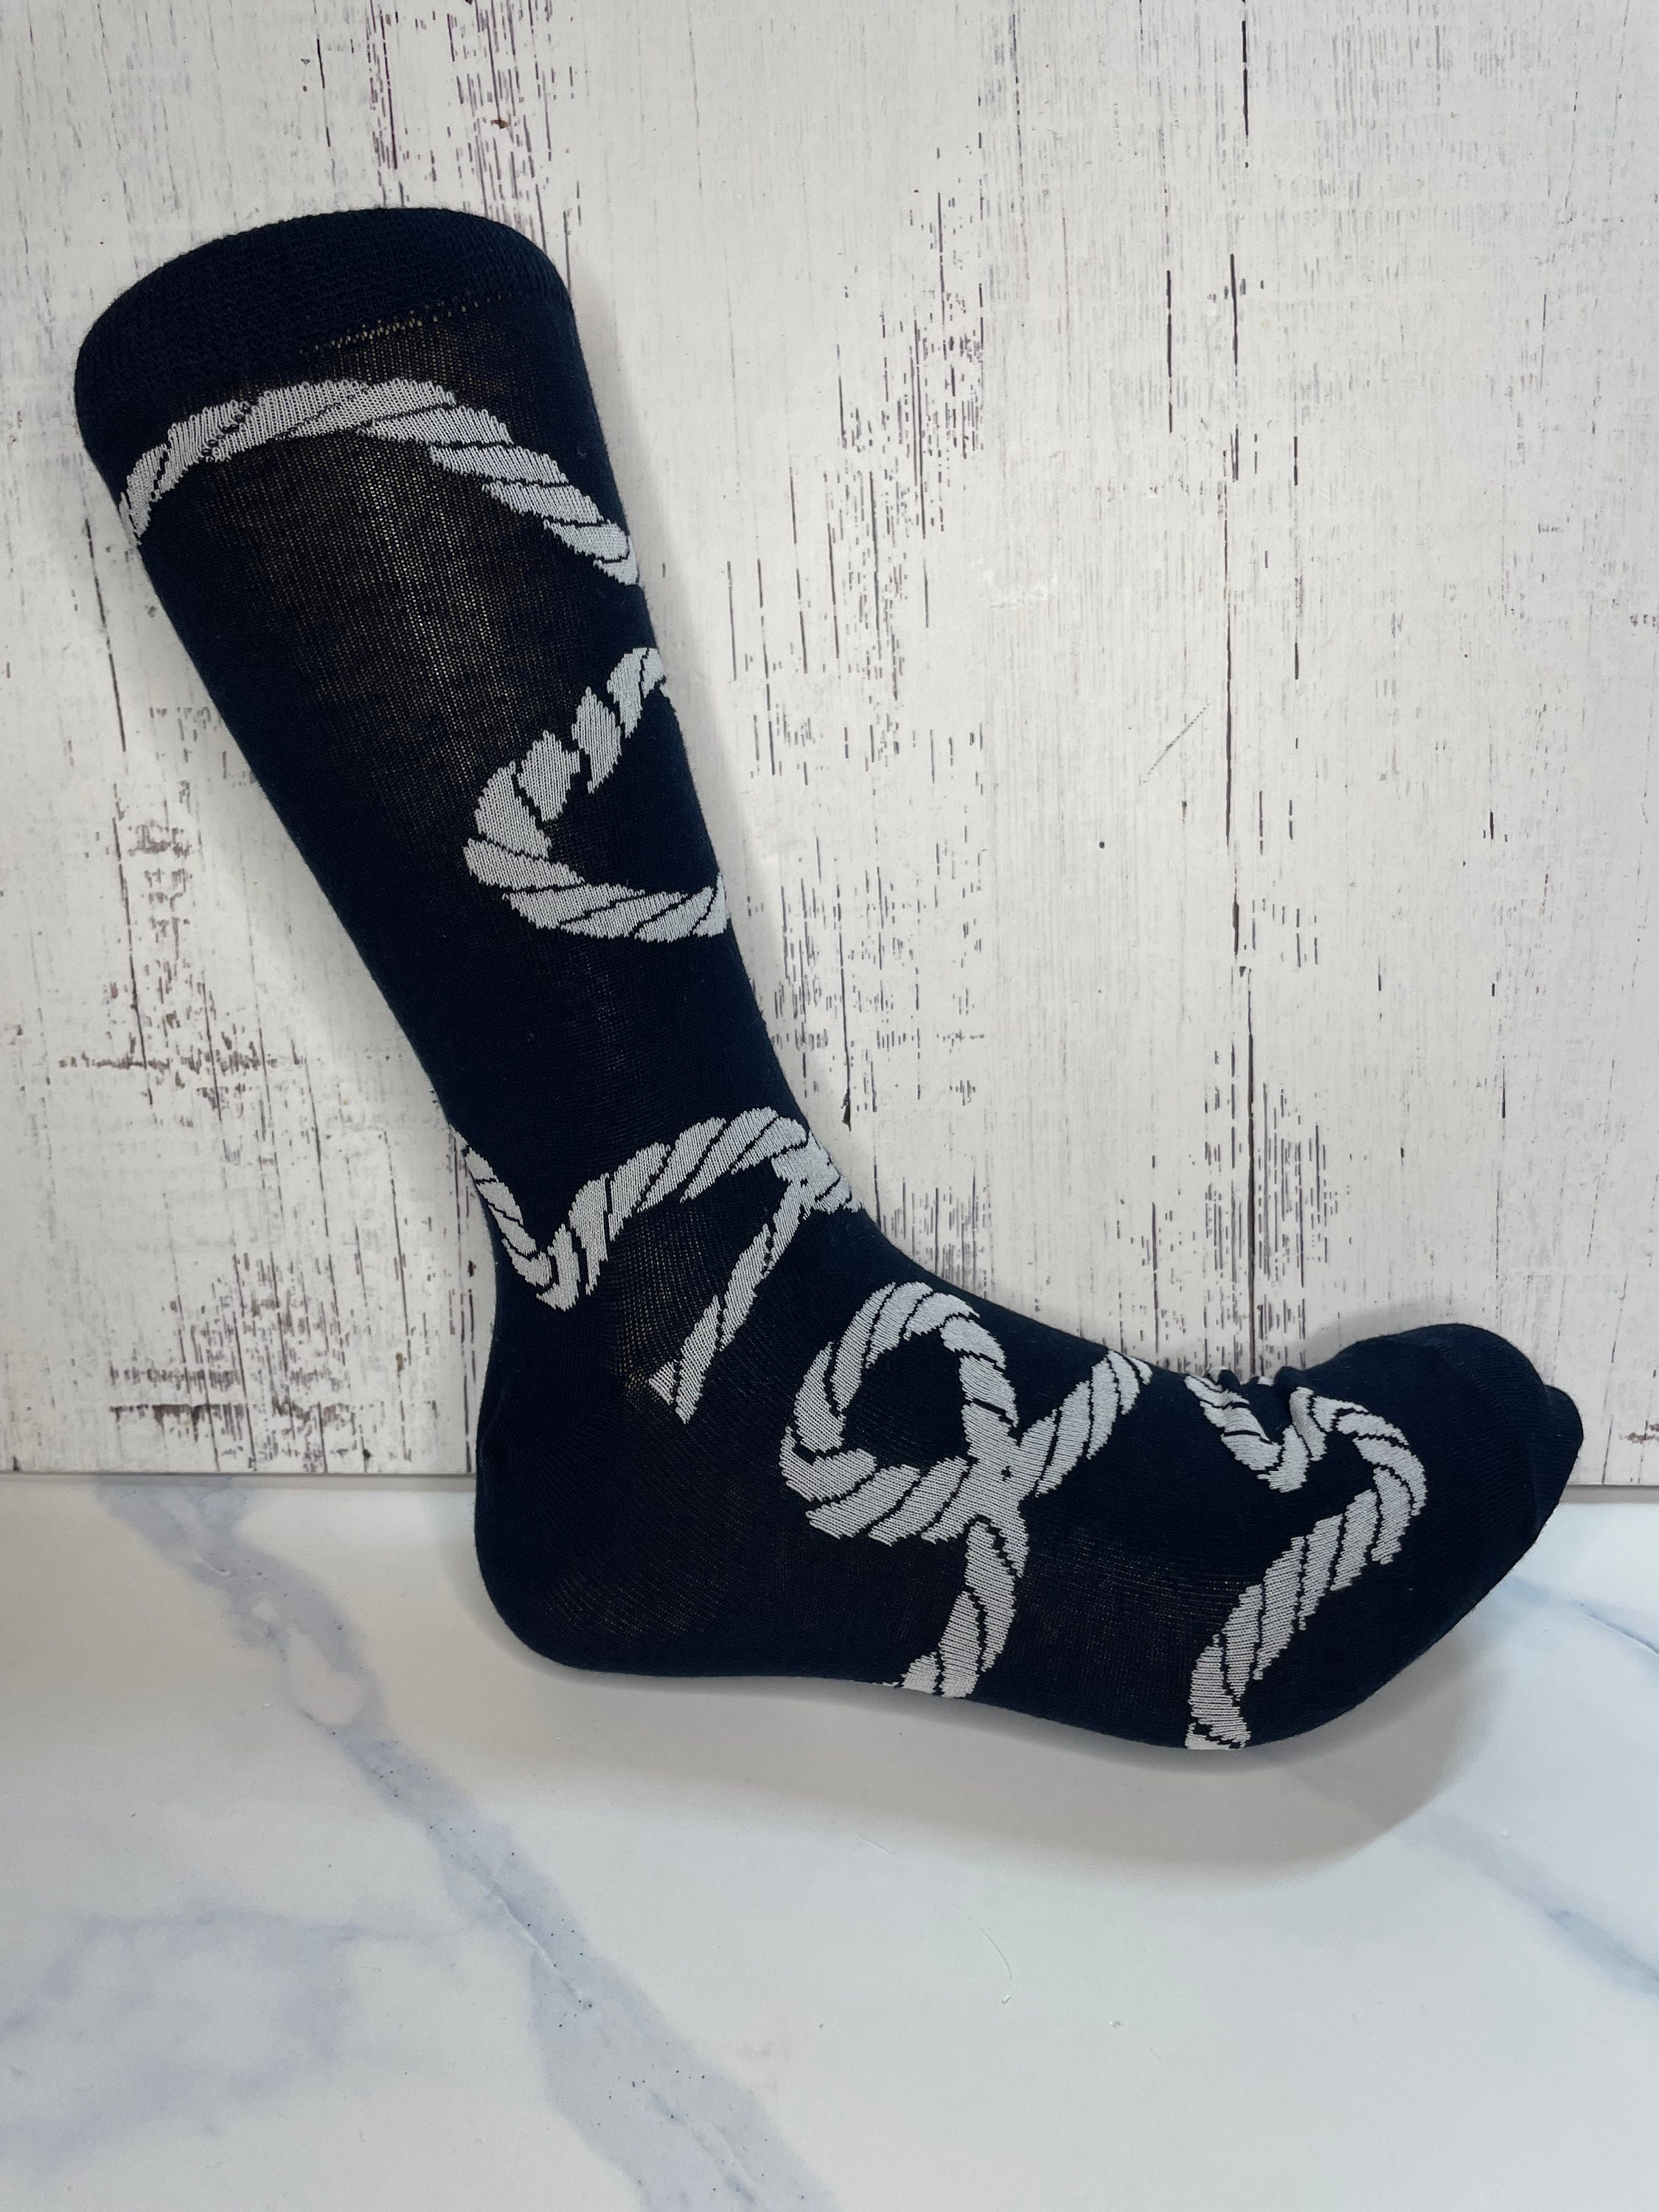 Accessories  Louis Vuitton Womens Socks One Size Gray With Black